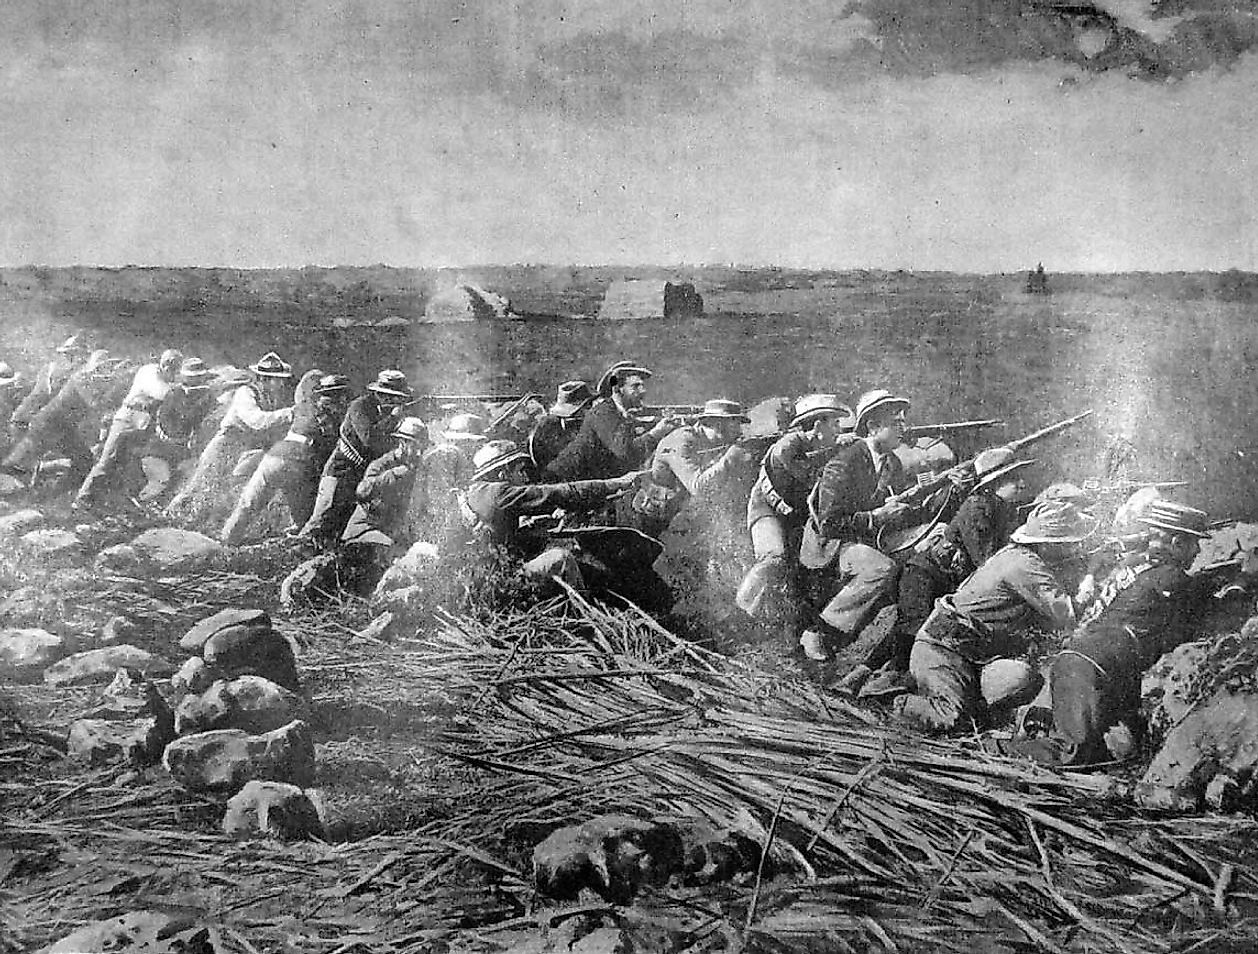 Boer soldiers fighting from the trenches during the battle in Mafeking.